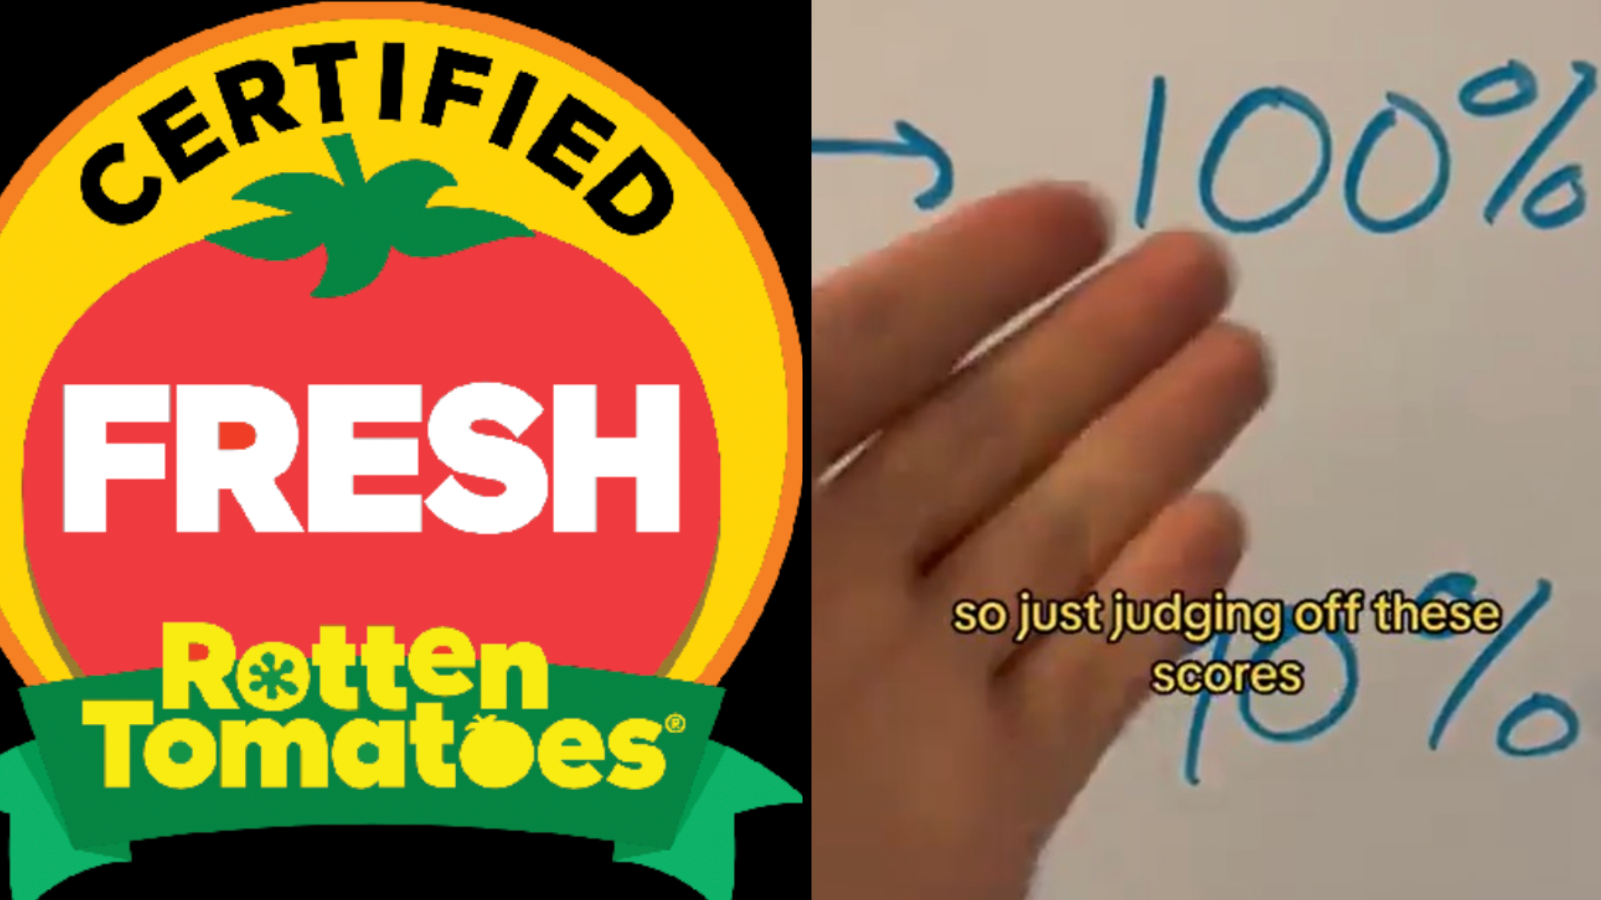 rotten tomatoes logo png